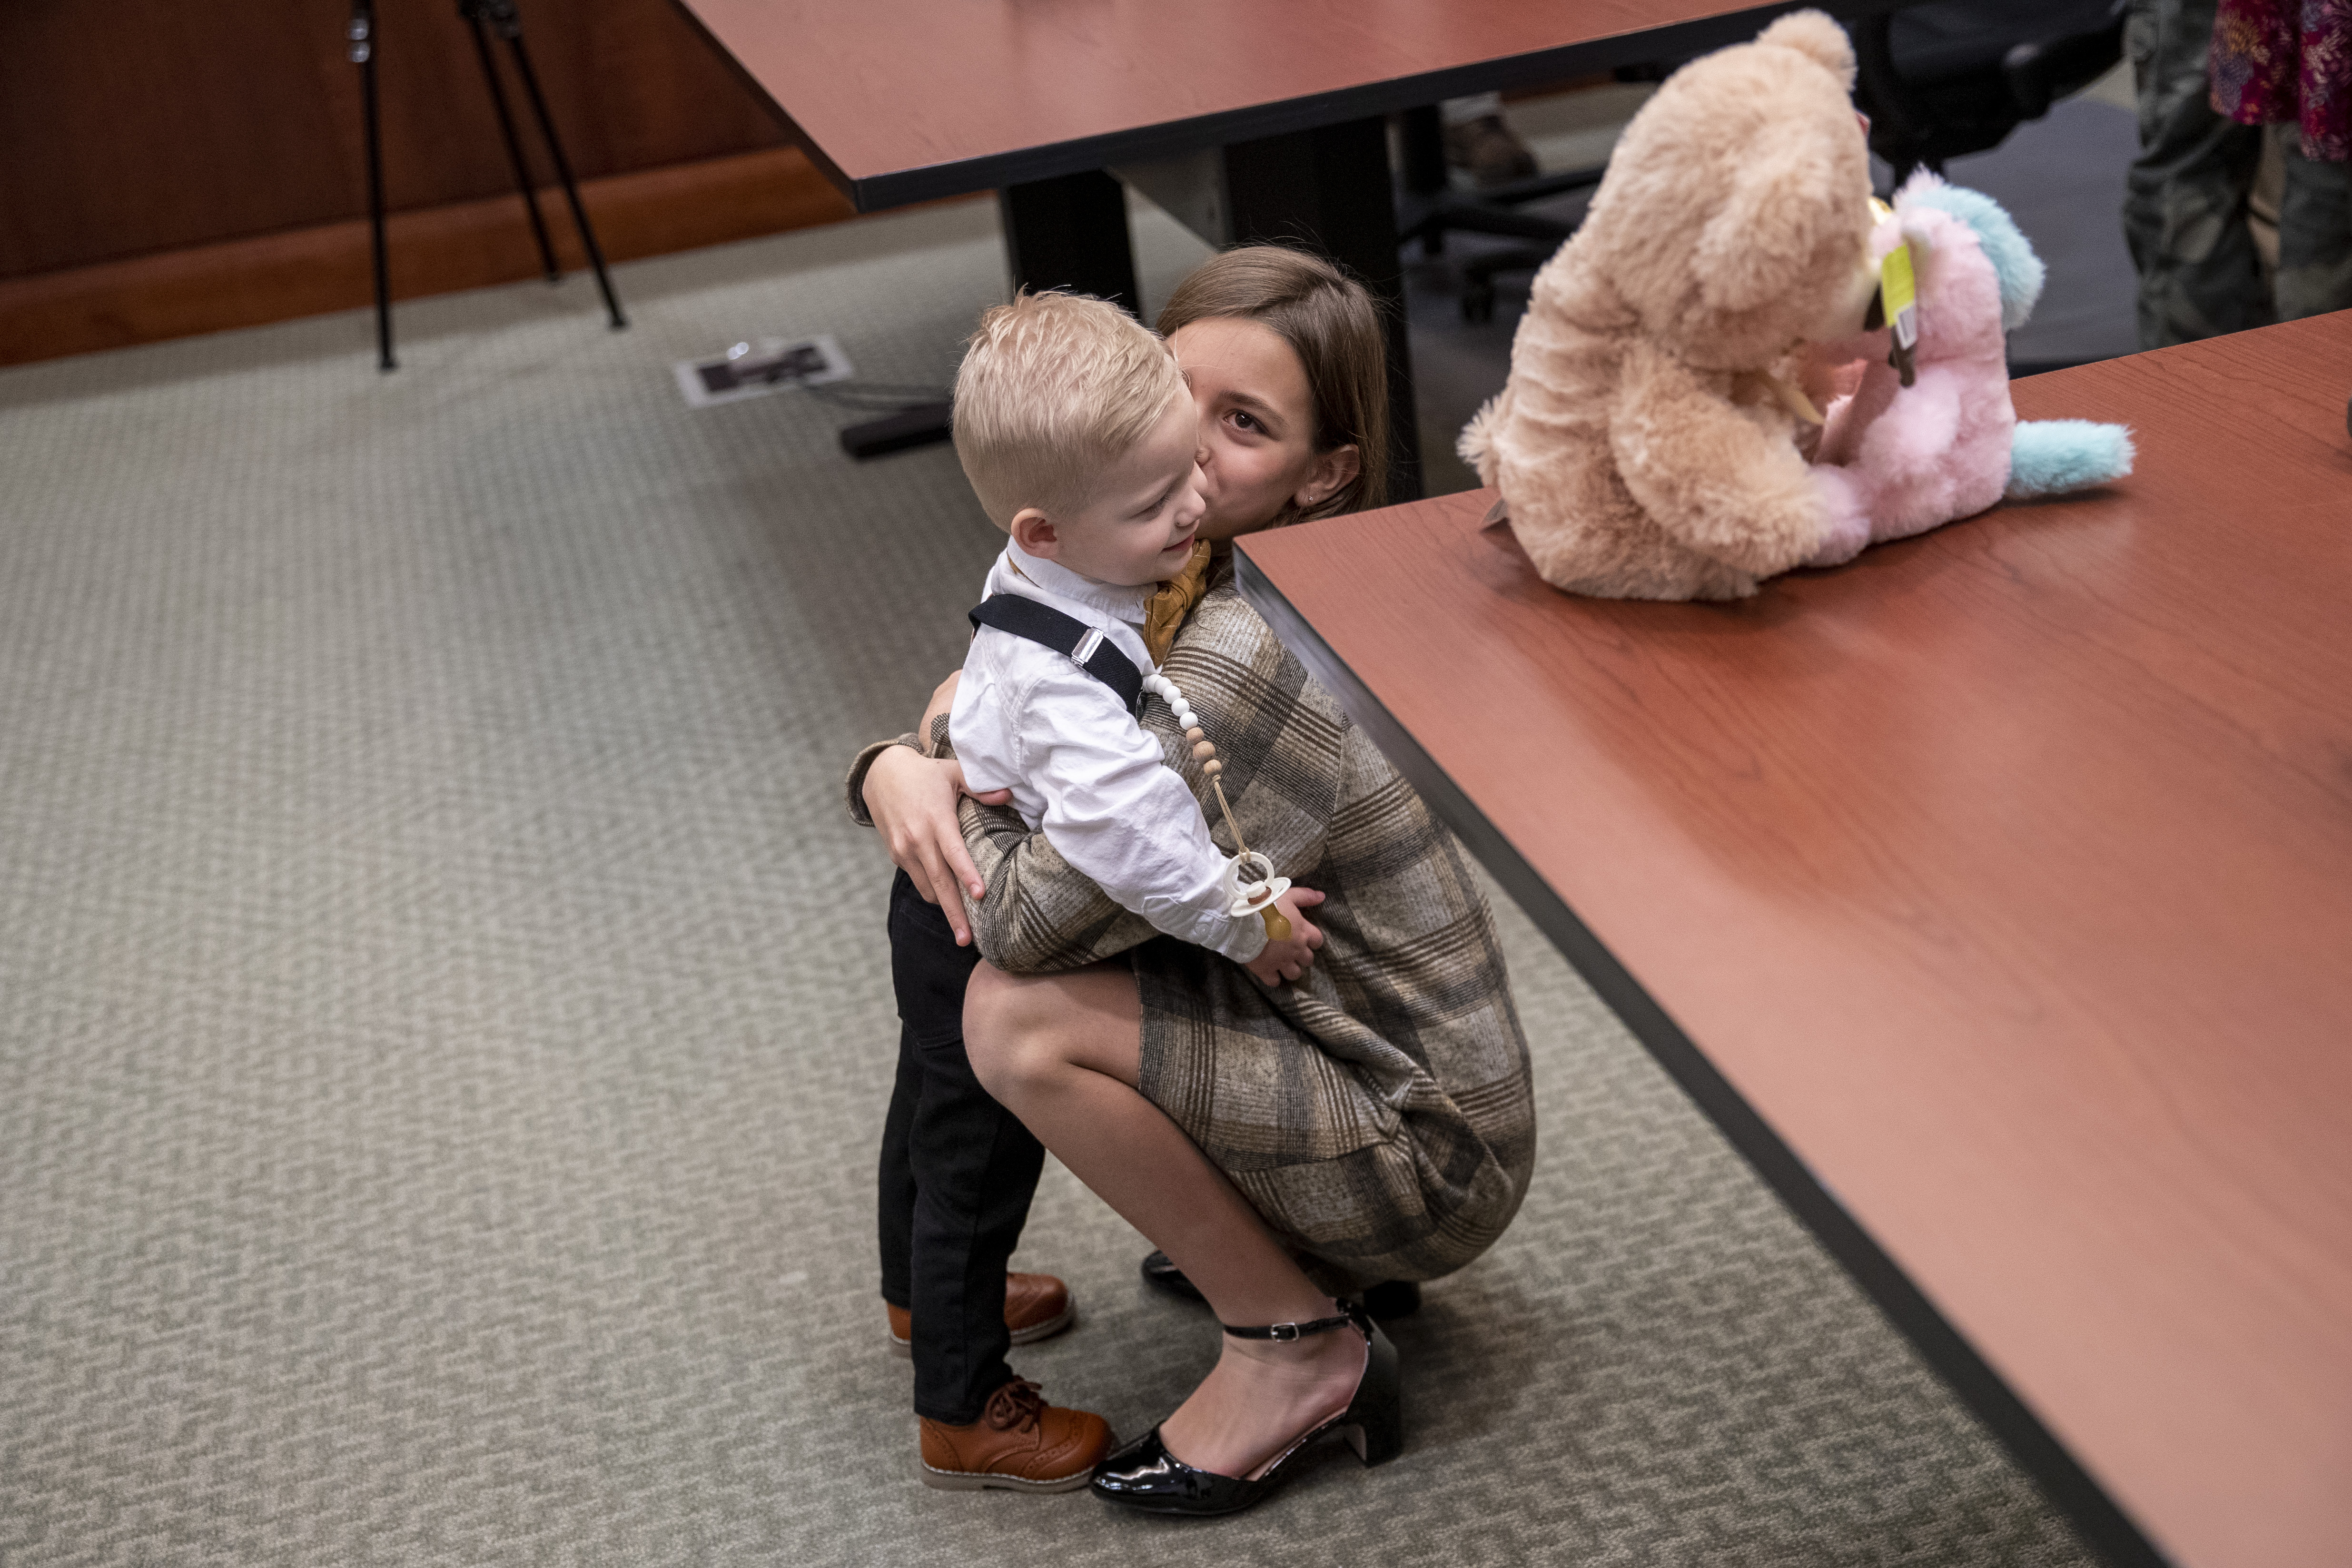 Corryn Myers, 10, hugs her brother Eames, 1, during Adoption Day at the Kent County Courthouse in Grand Rapids on Thursday, Dec. 8, 2022. Tammy and Jordan Myers are the biological parents of 1-year-old twins Eames and Ellison. Lauren Vermilye, a surrogate, gave birth to the twins after Tammy went through breast cancer treatment and has no claim to the babies. The Myers family was able to adopt the twins after convincing the court system to grant them custody. (Cory Morse | MLive.com)